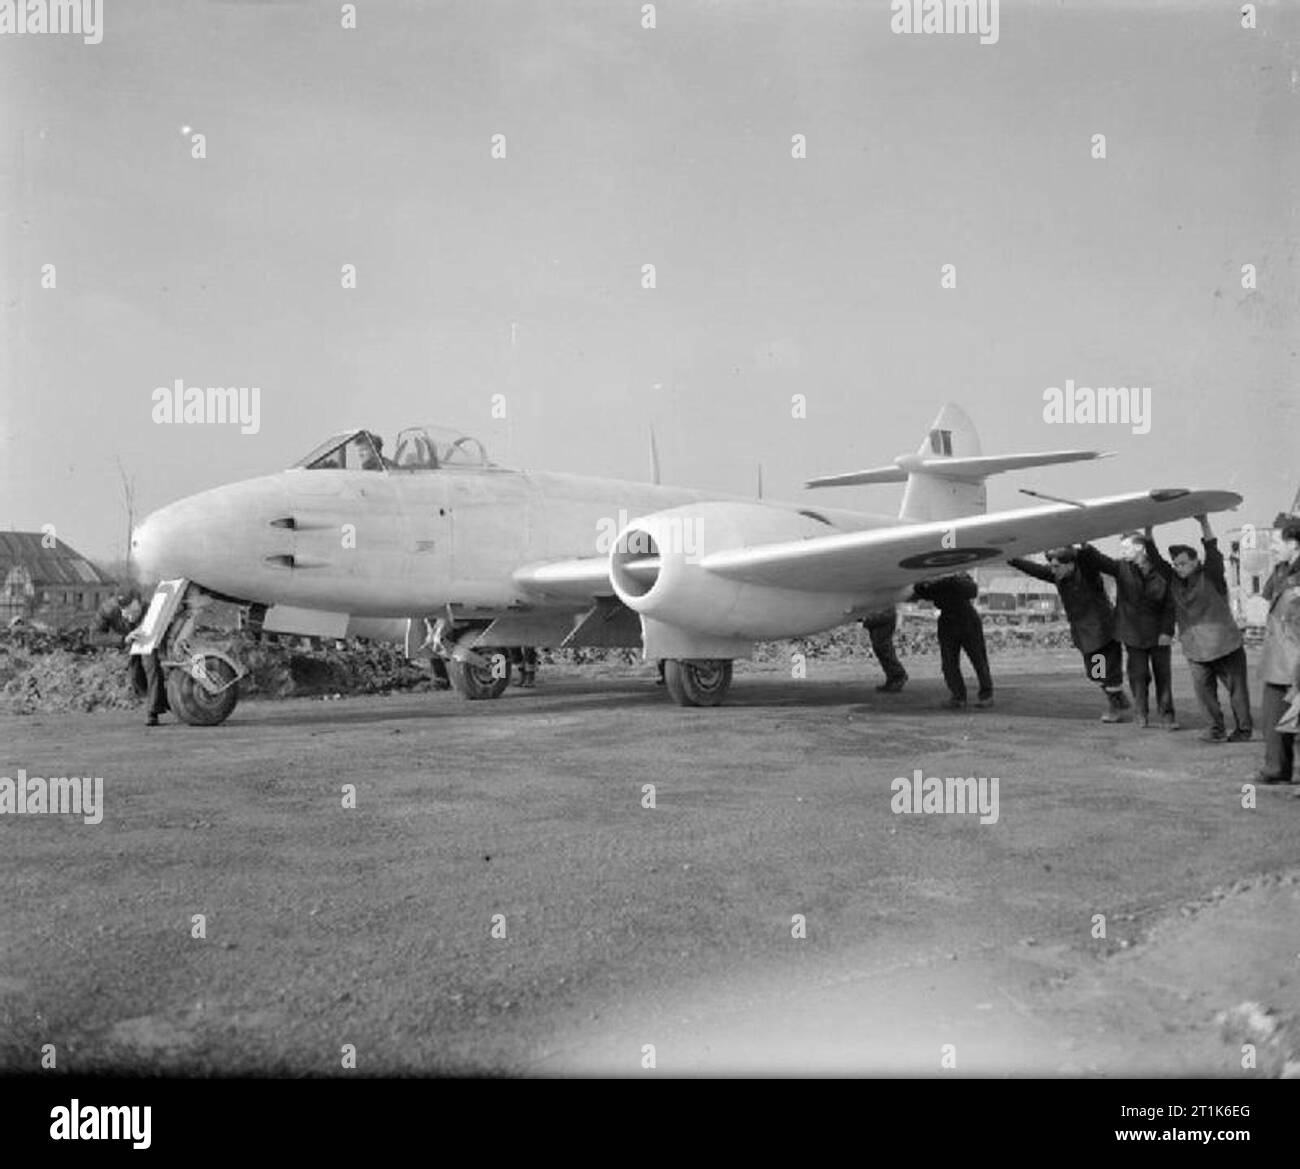 Royal Air Force- 2nd Tactical Air Force, 1943-1945. White-painted Gloster Meteor F Mark III, EE239 'YQ-Q', of No. 616 Squadron RAF Detachment is pushed to its dispersal point at B58/Melsbroek, Belgium. A flight of Meteors was detached from 616 Squadron to 2nd TAF to provide air defence against the Messerschmitt Me 262, being joined by the whole Squadron in March 1945. During the initial deployment, the Meteors were painted white to aid identification by other Allied aircraft. Stock Photo